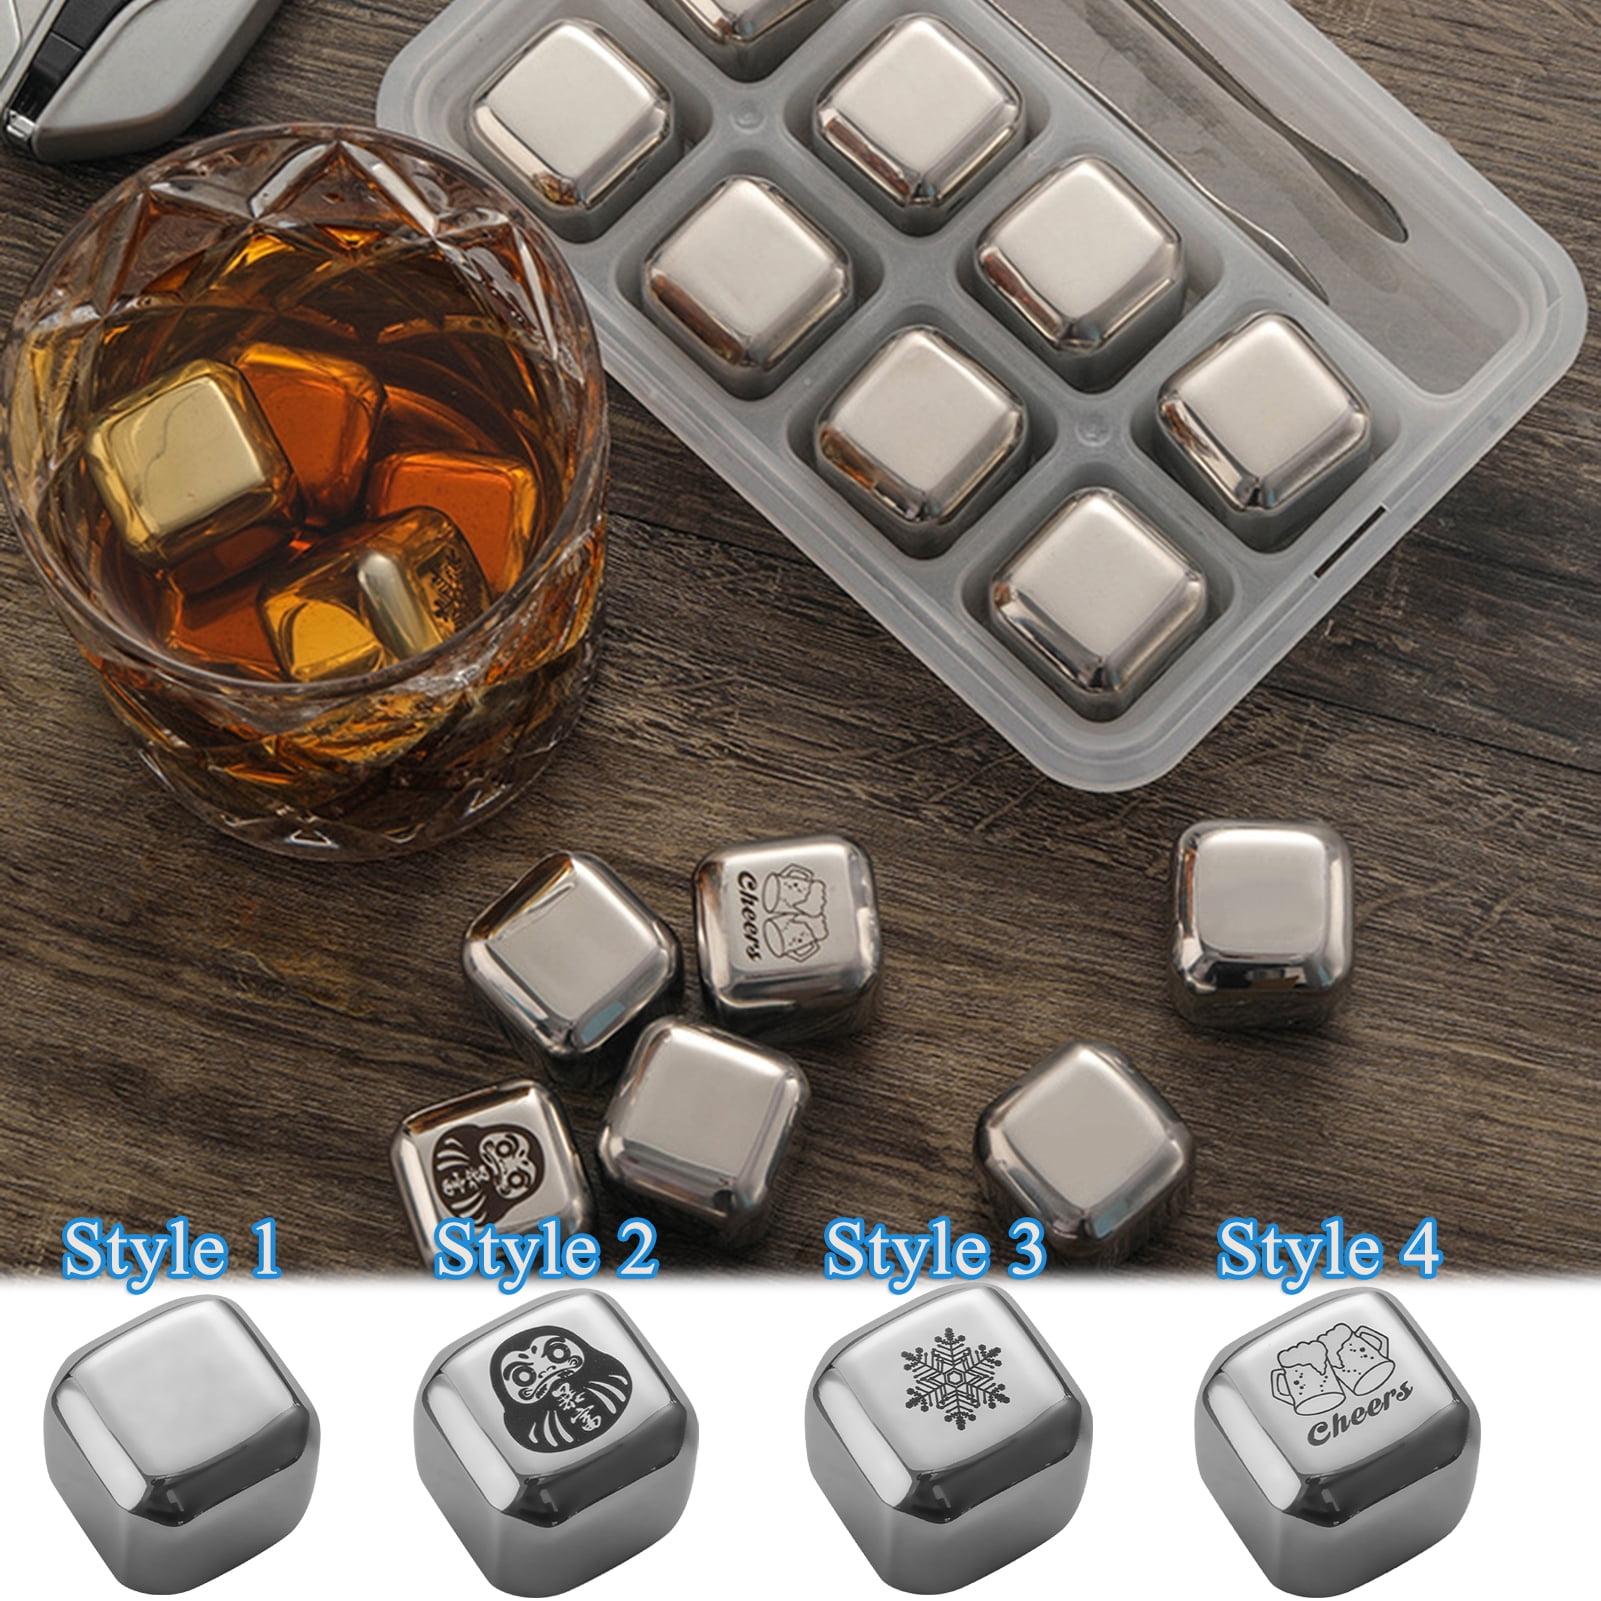 Whiskey Stone Gift Set - Stainless Steel Whiskey Stones in a Wooden Army  Crate | Reusable Ice Cube for Whiskey | Whiskey Gift Set for Men, Dad